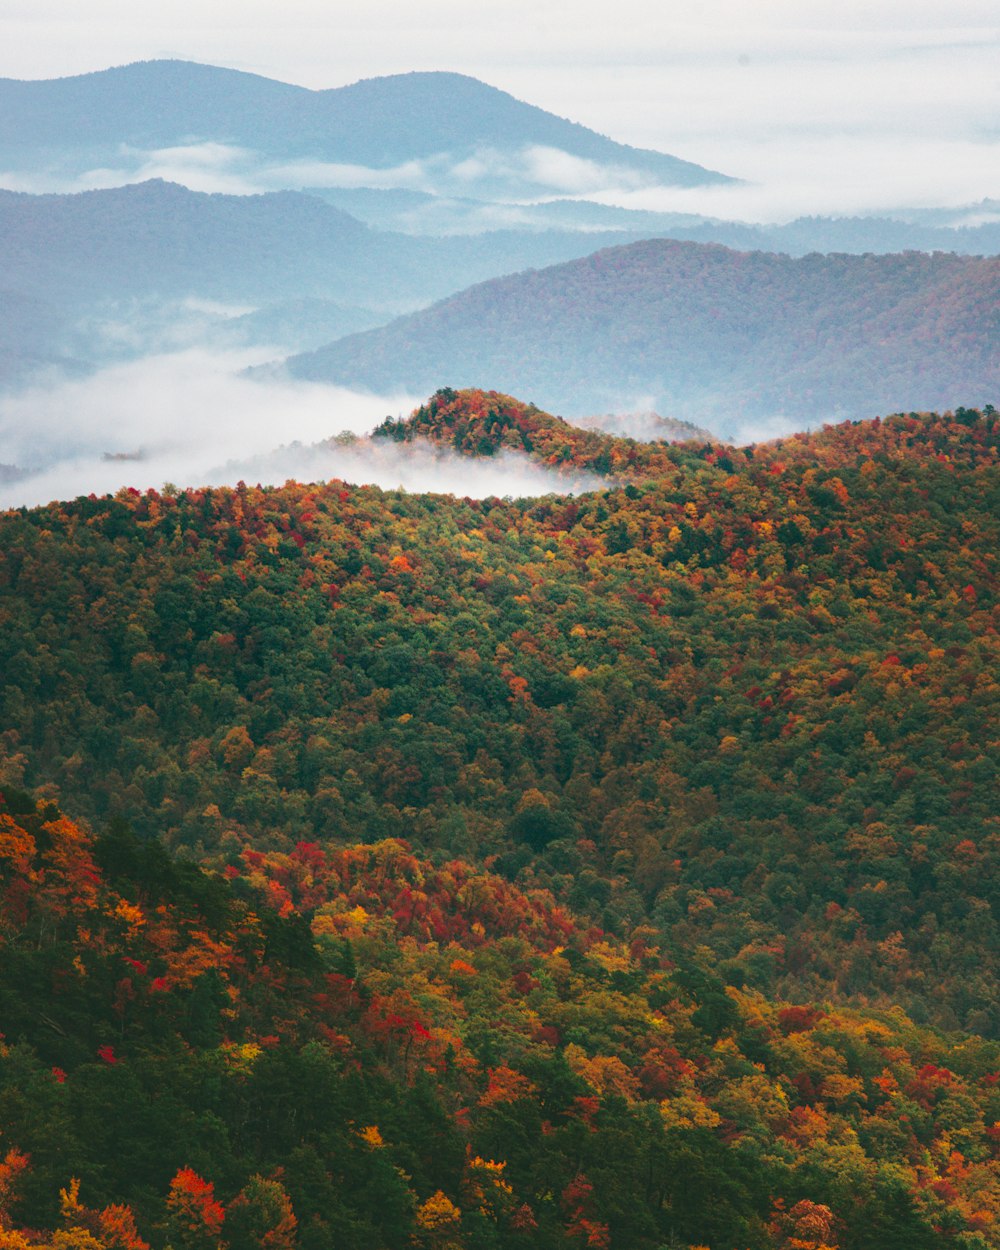 a scenic view of a mountain range covered in fall foliage